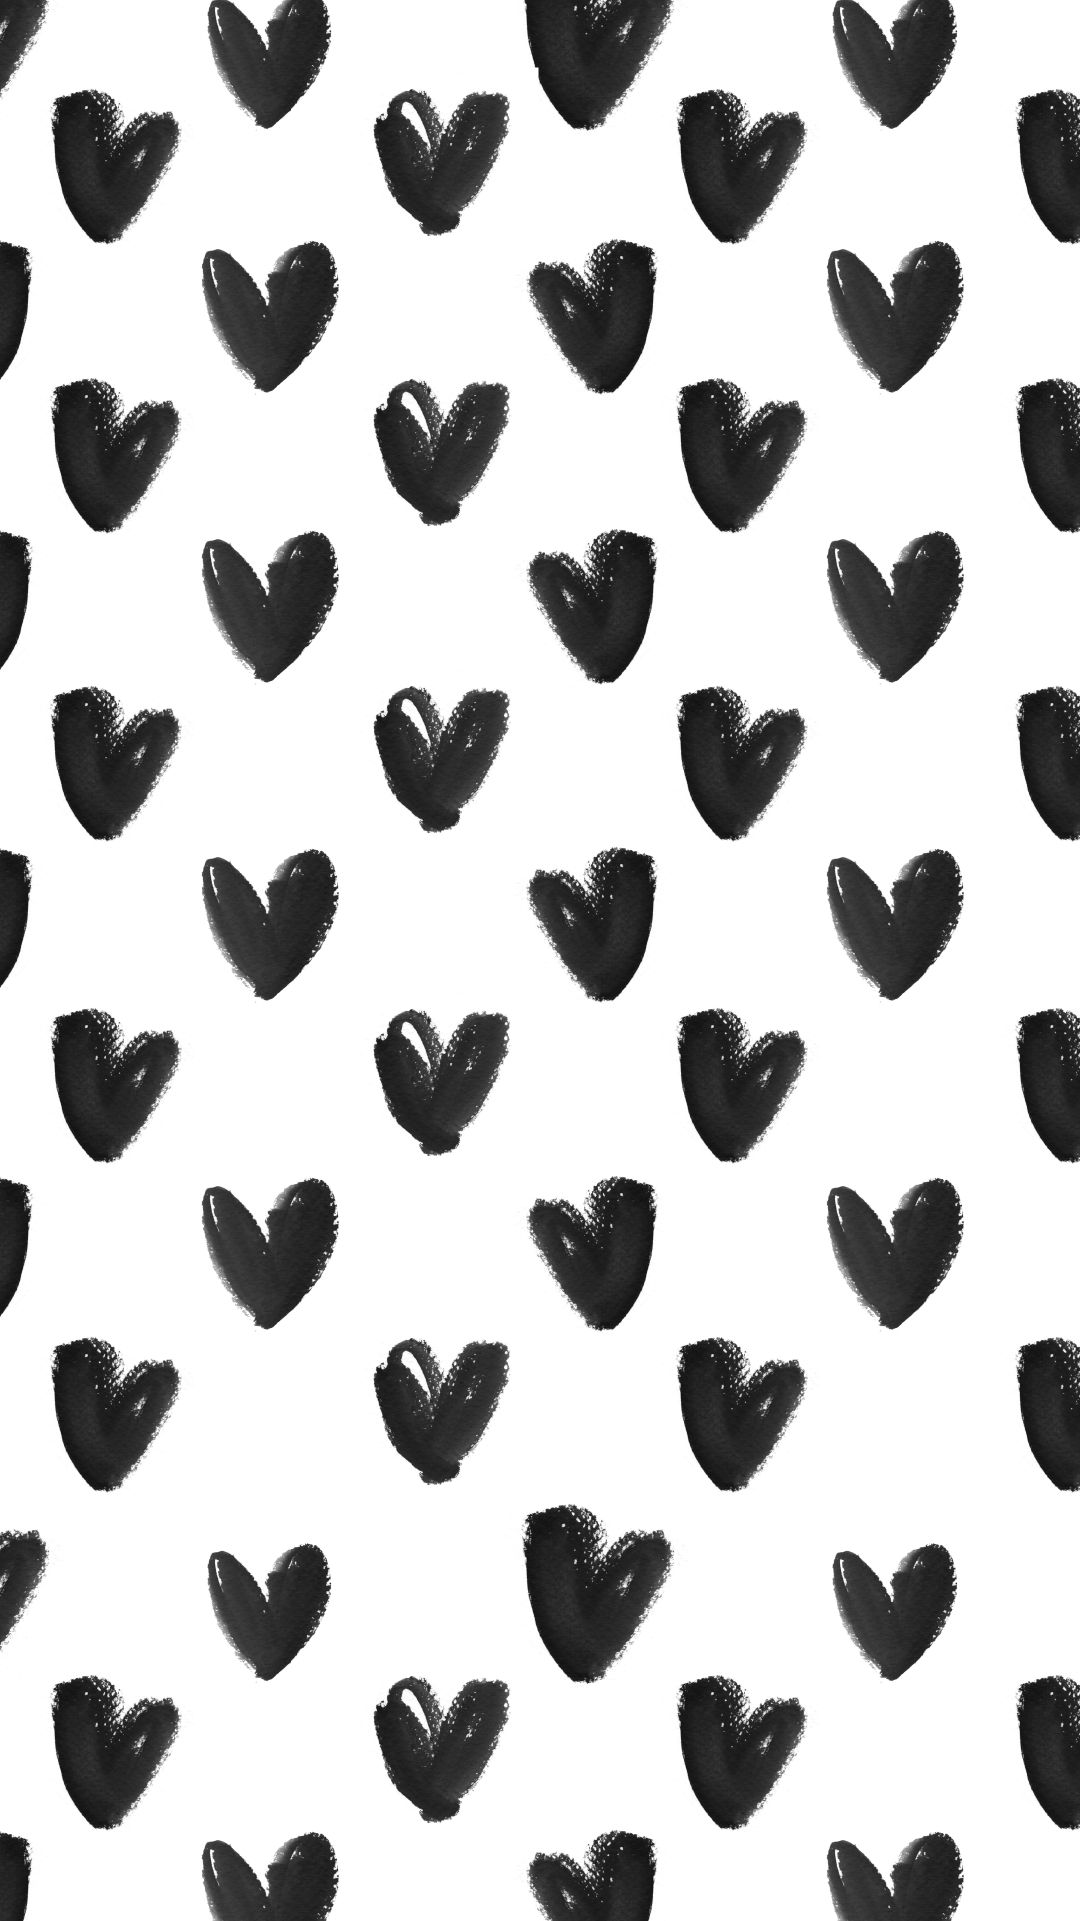 Black And White Heart Backgrounds - Wallpaper Cave